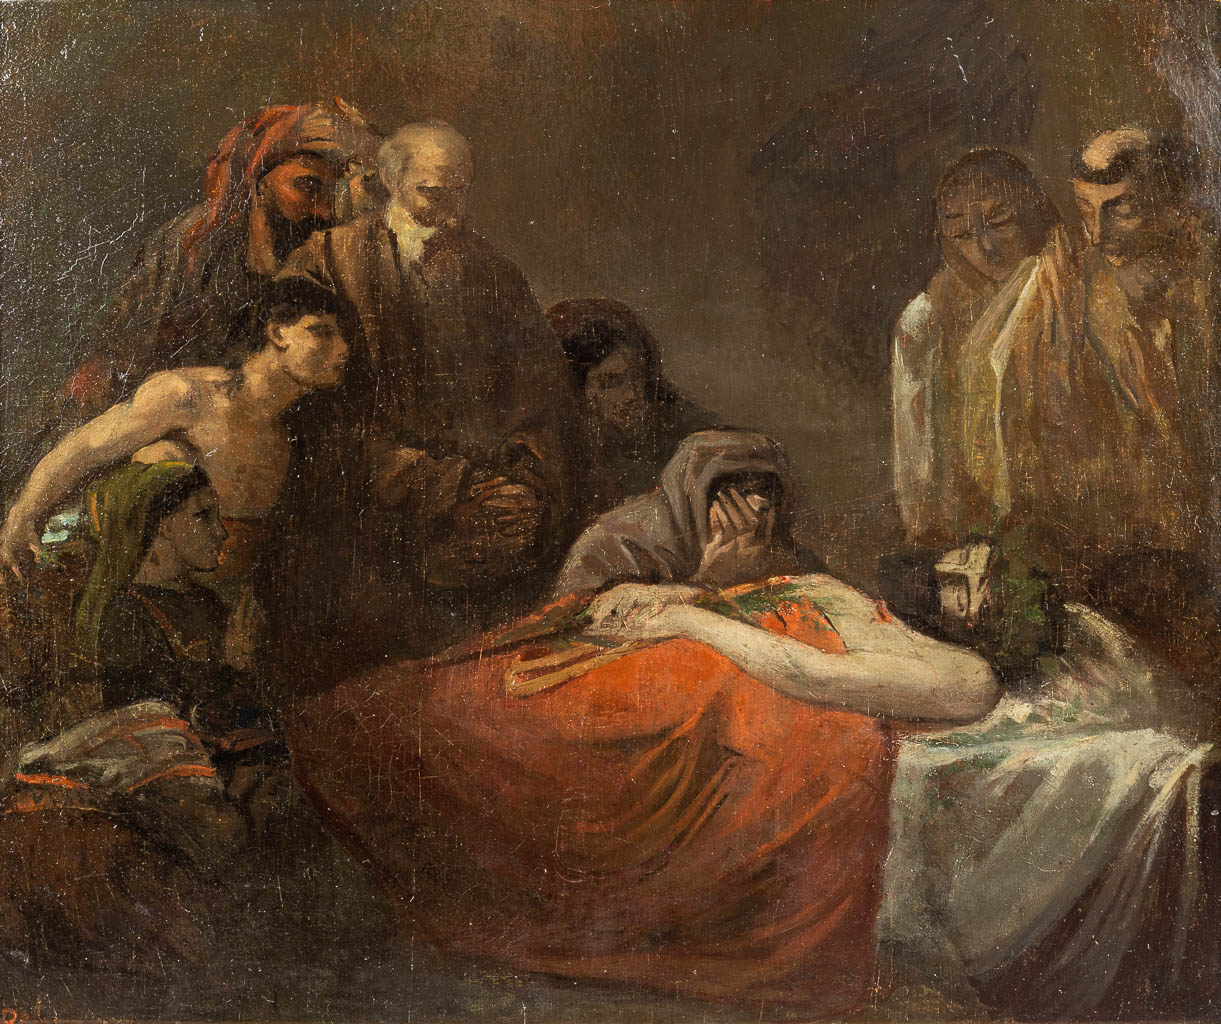 No signature found, 'Christ in the tomb' a painting, oil on canvas. 19th century. (66 x 56 cm)